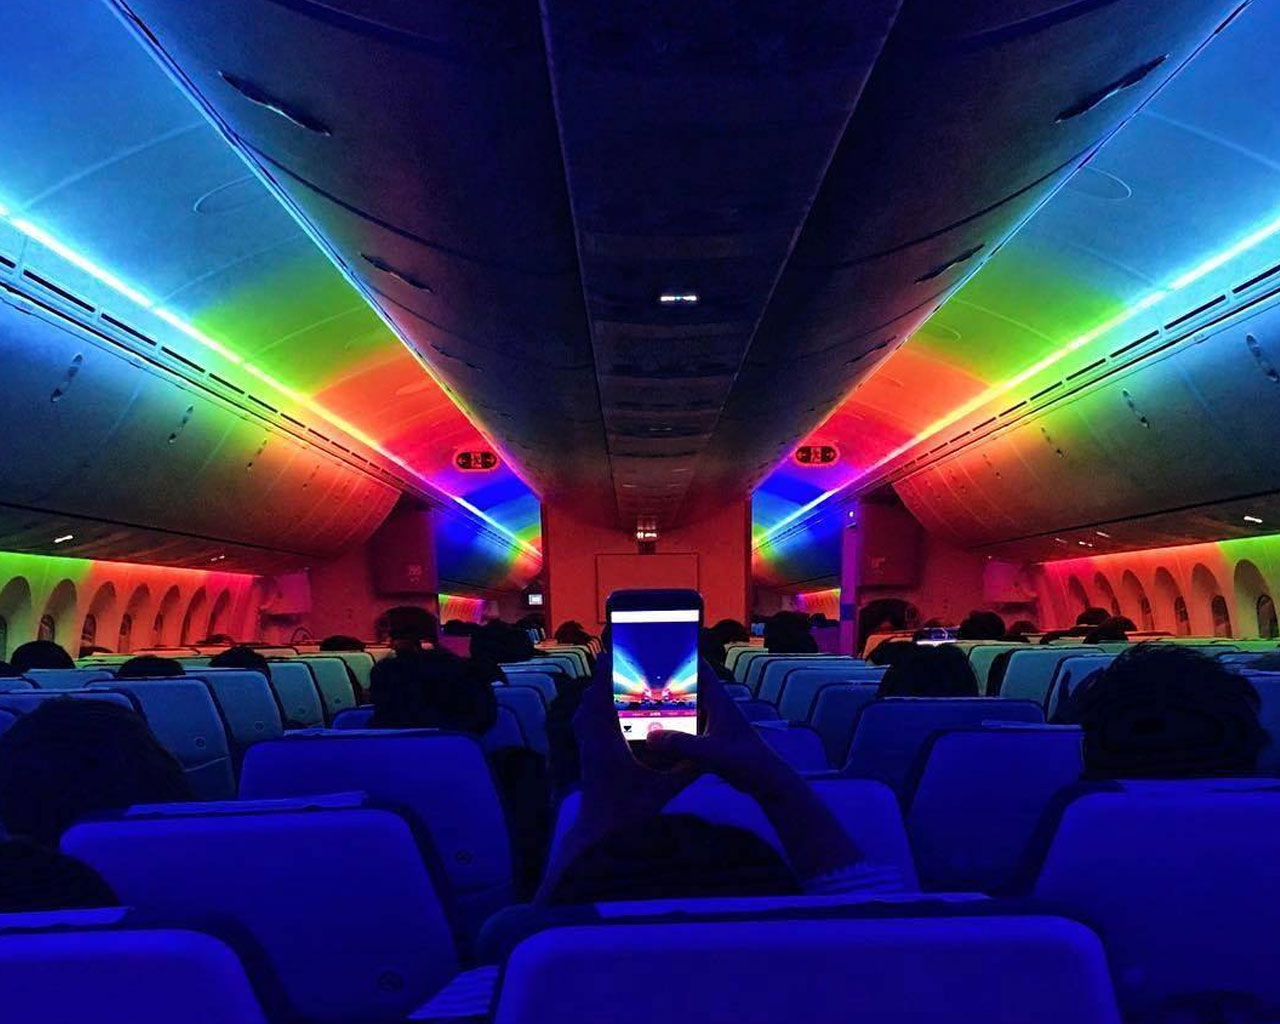 Scoot with Dreamliner 787. Colourful mood lights that change depending on the time of the day